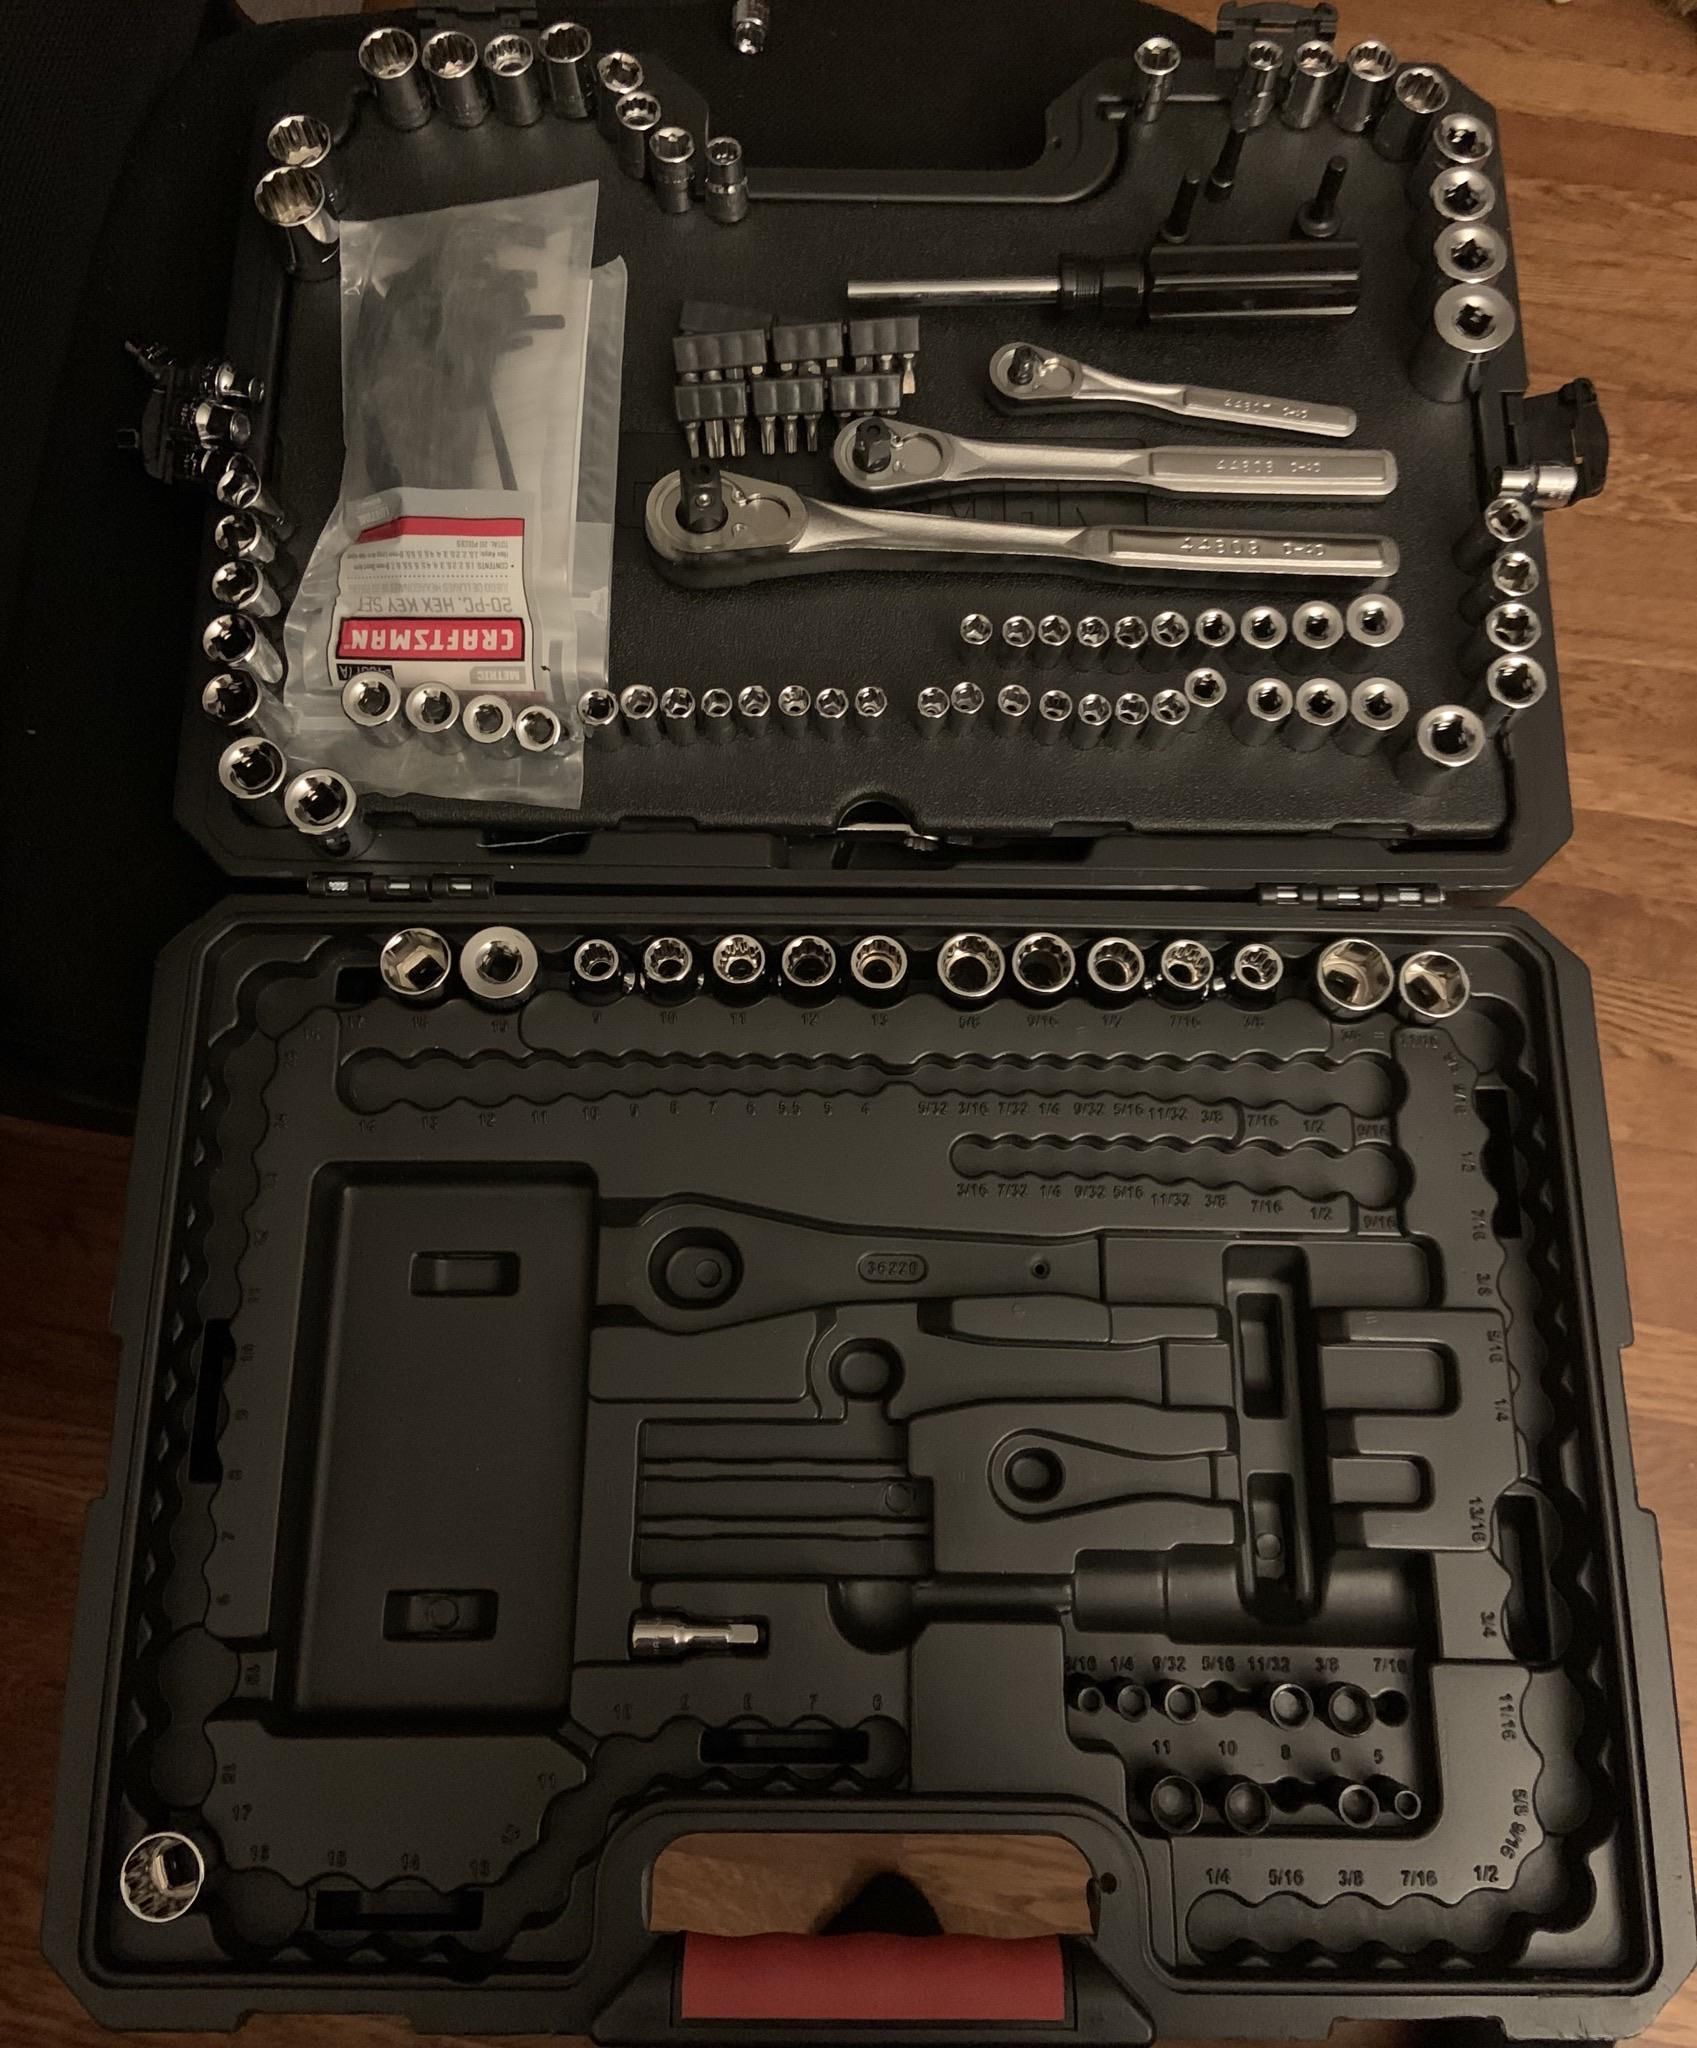 I just wanted to check my new tool kit for one screwdriver bit. Instead I took 20 minutes to put everything back after opening it upside down.